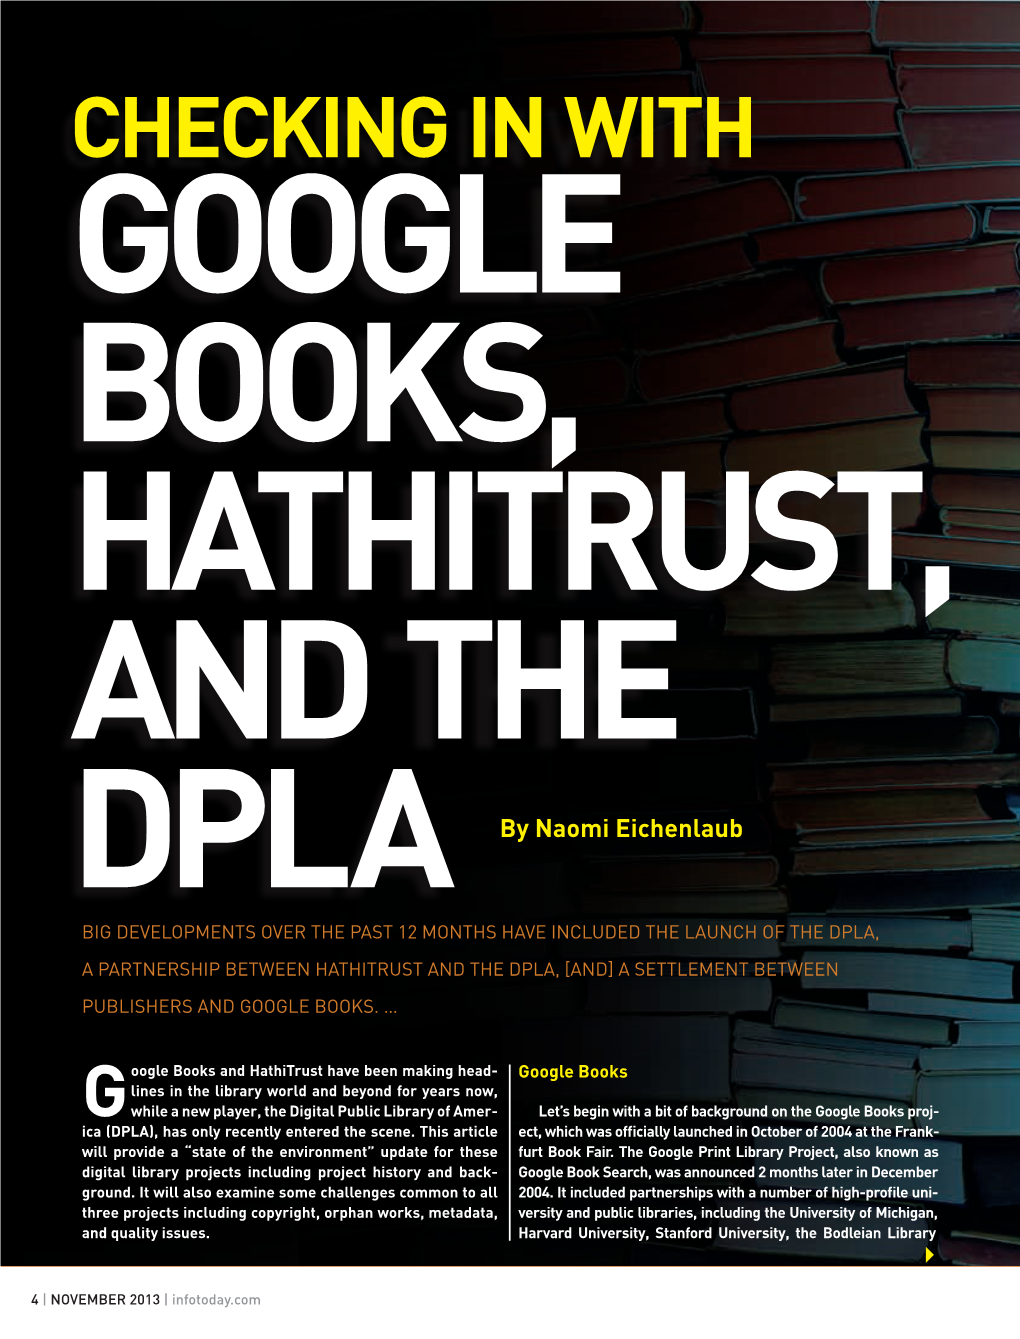 Checking in with Google Books, Hathitrust, and the DPLA